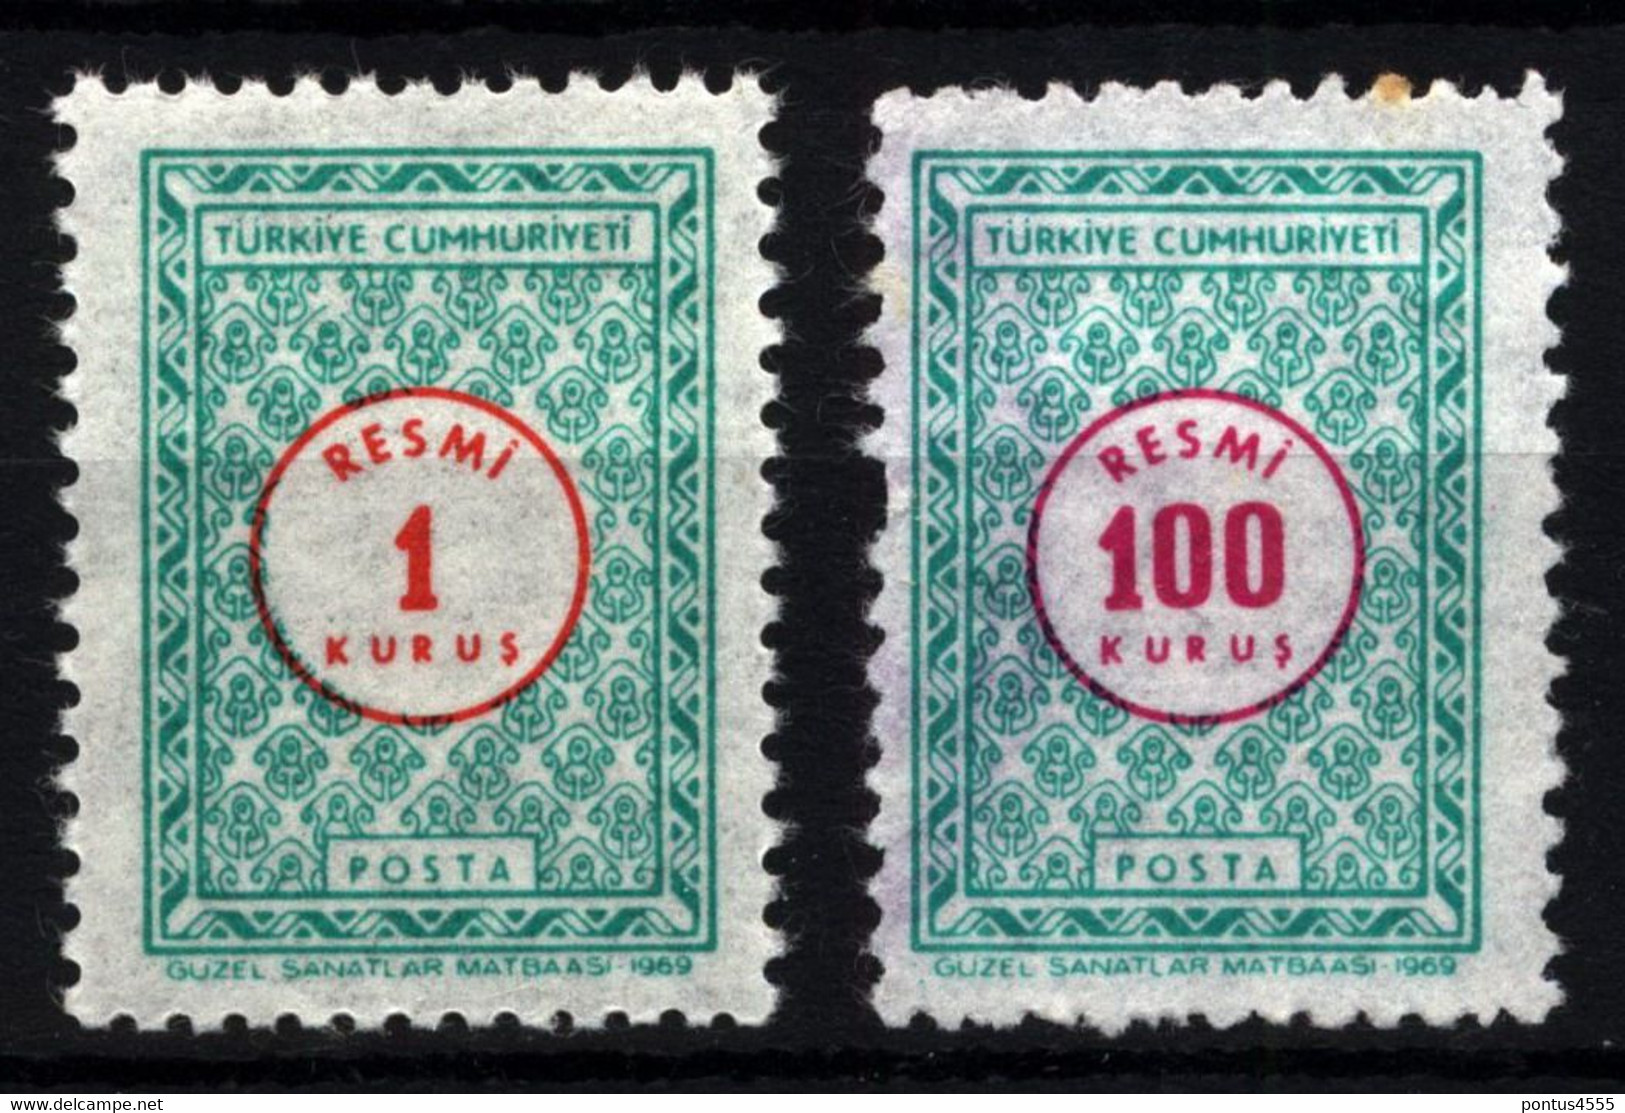 Turkey 1969 Mi D115, D118 Official Stamps Used - Postage Due